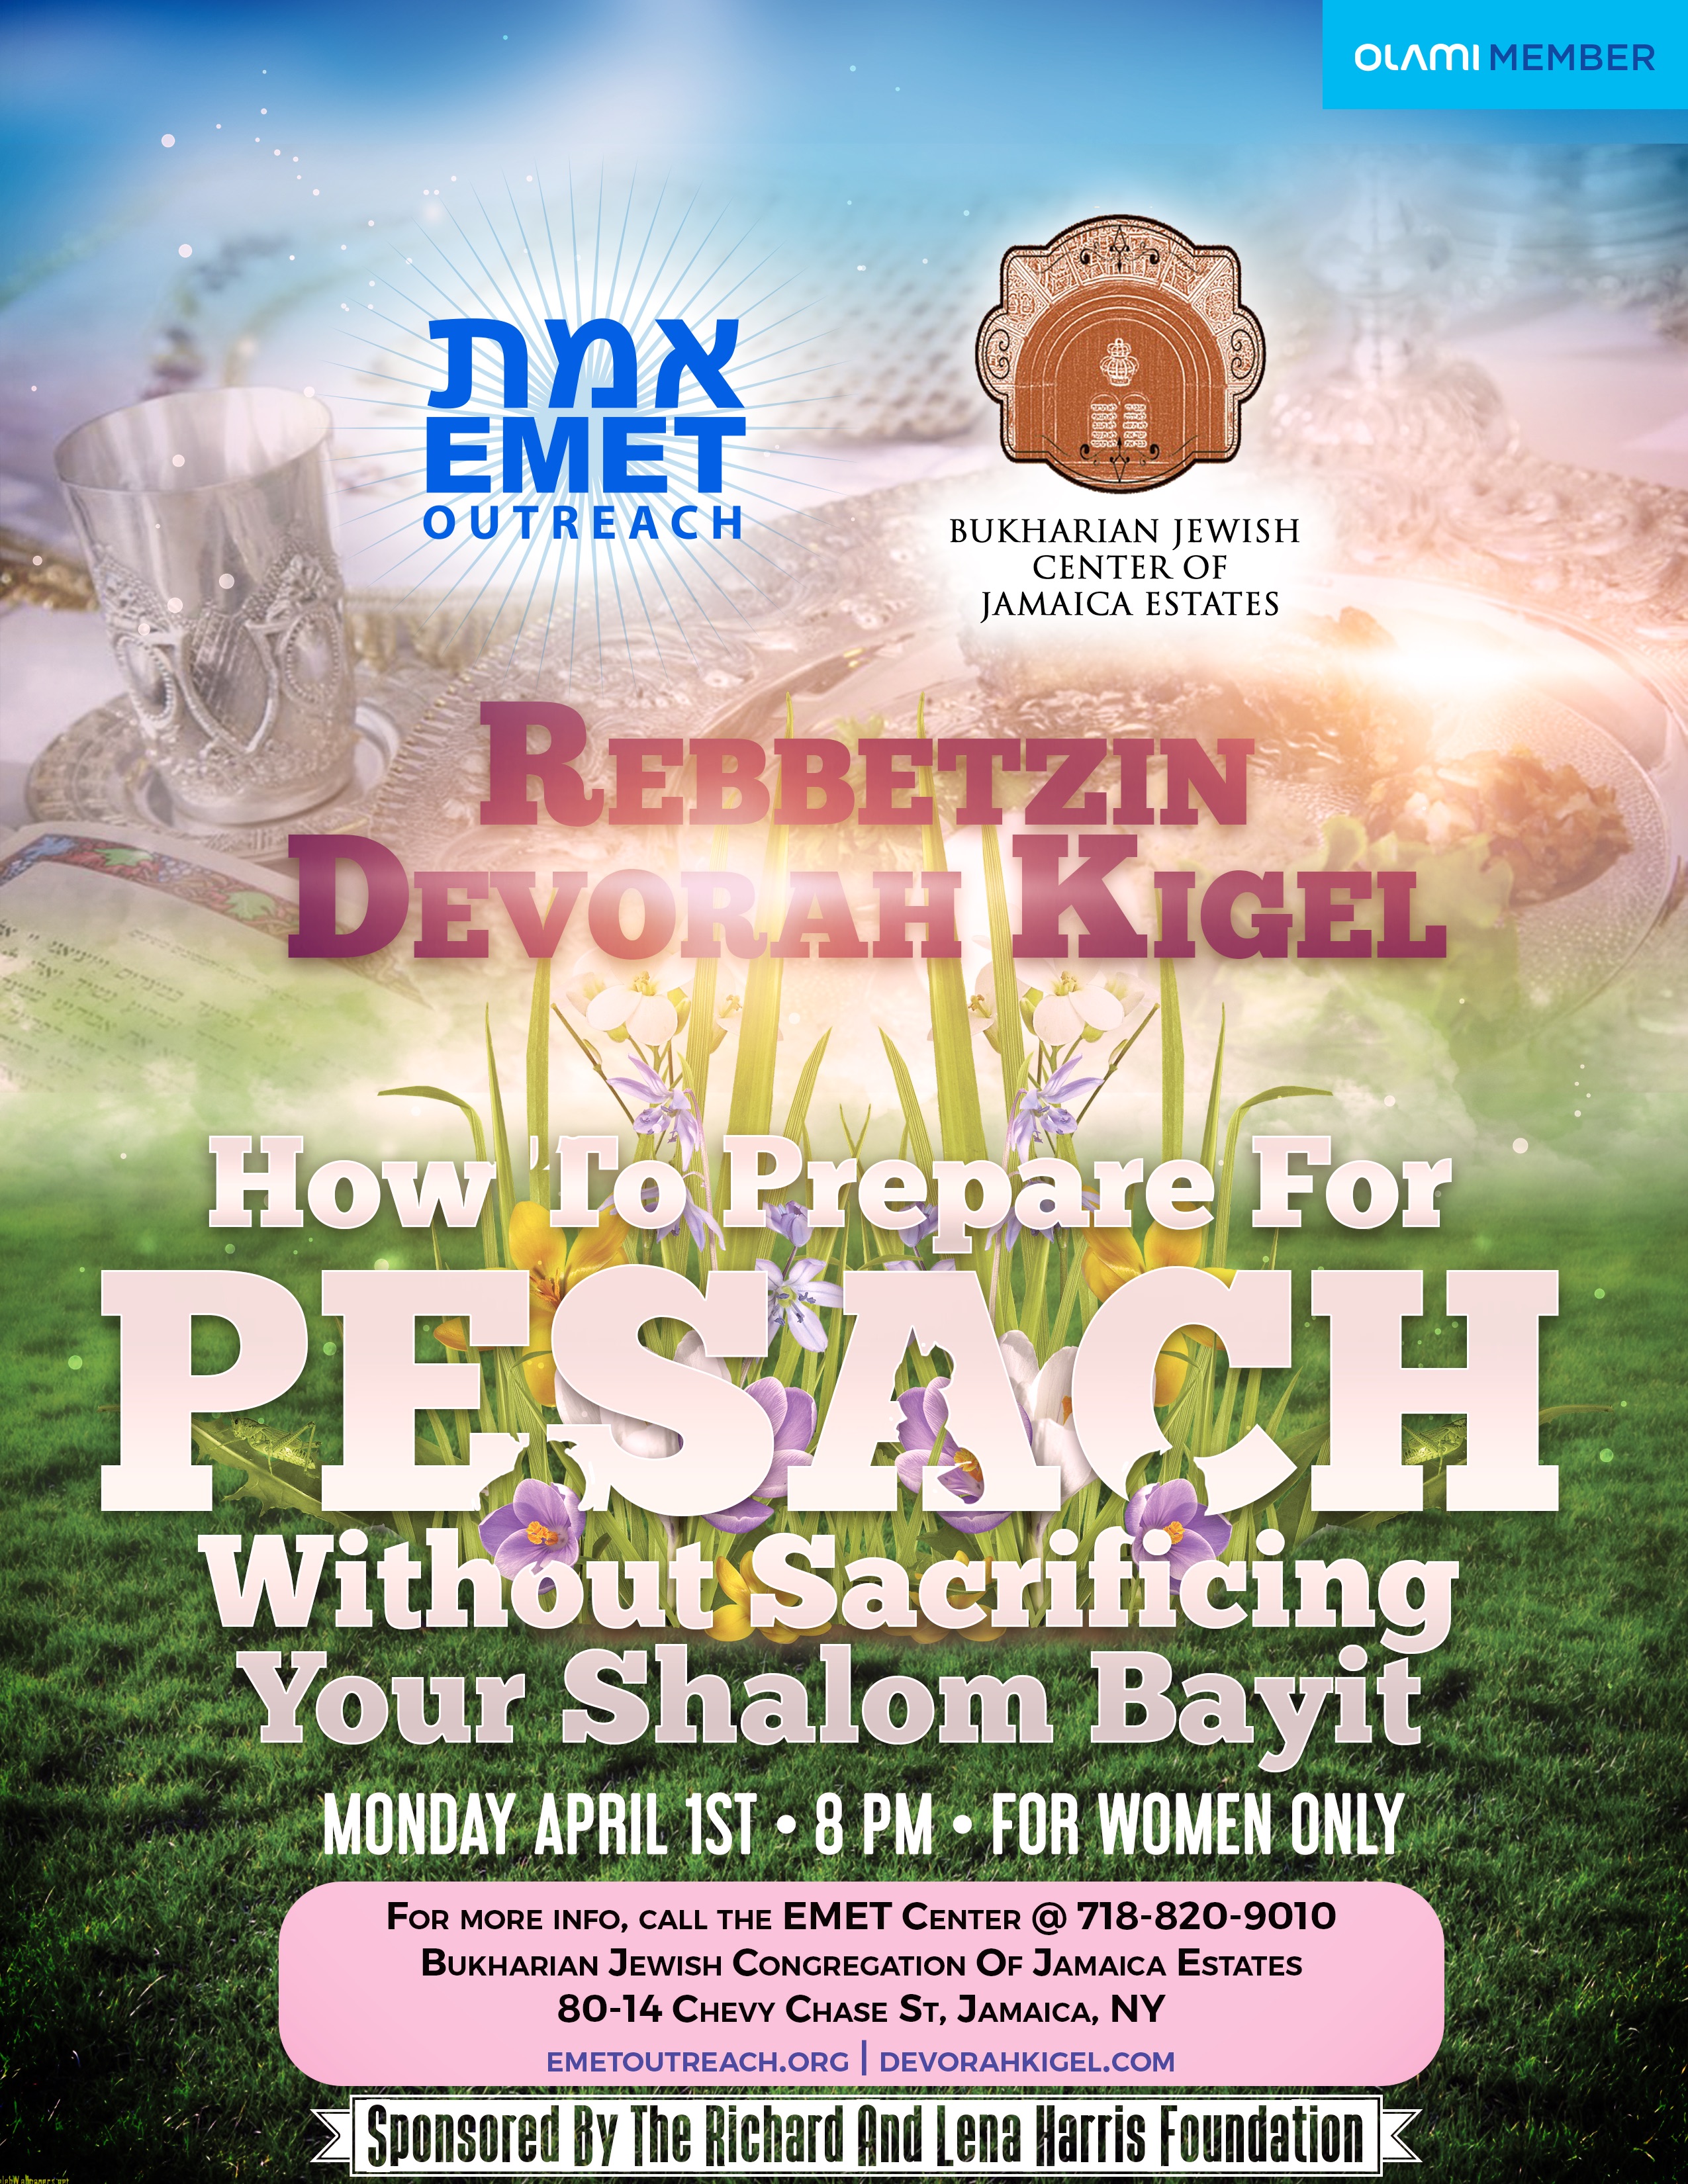 Reb Kigel Prepare For Pesach Without Sacrafice Shalom Bayit 2019